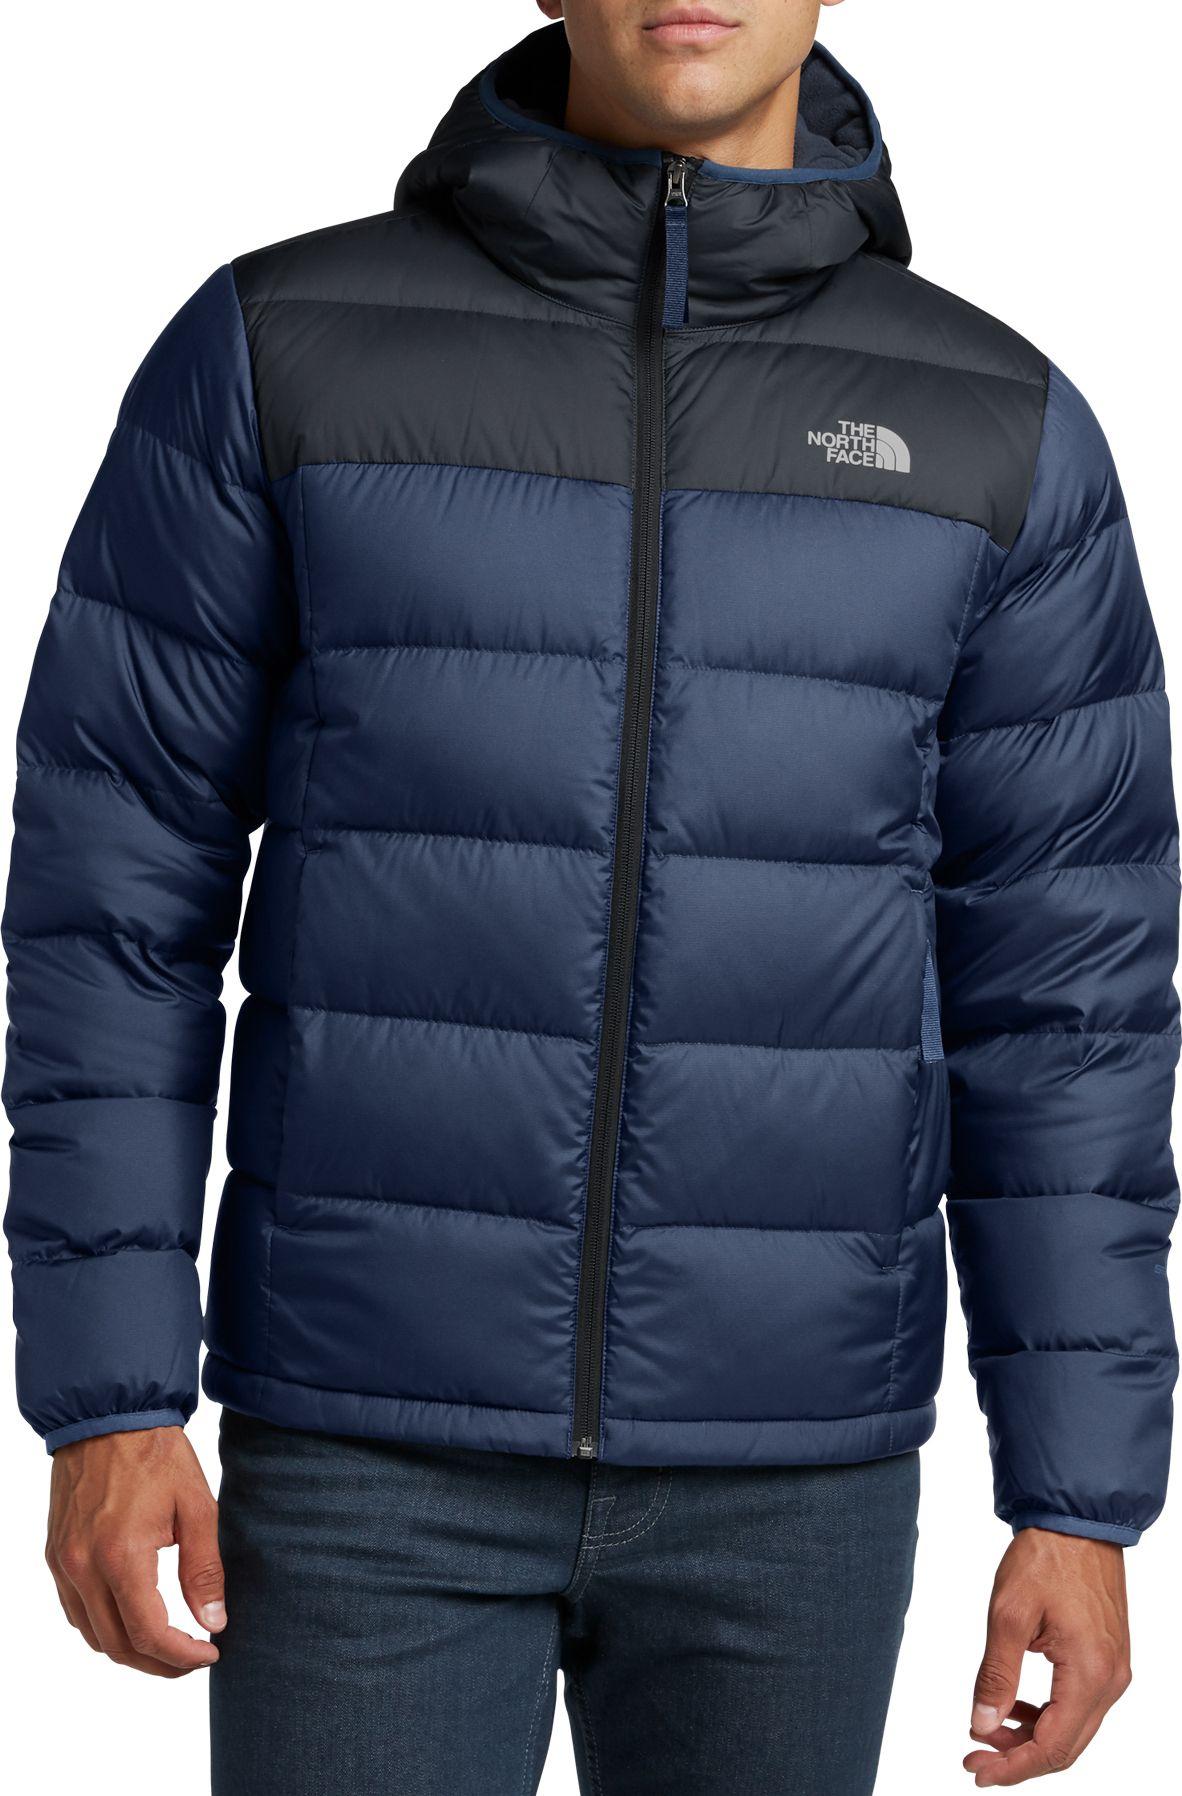 The North Face Alpz Luxe Winter Jacket in Blue for Men - Lyst